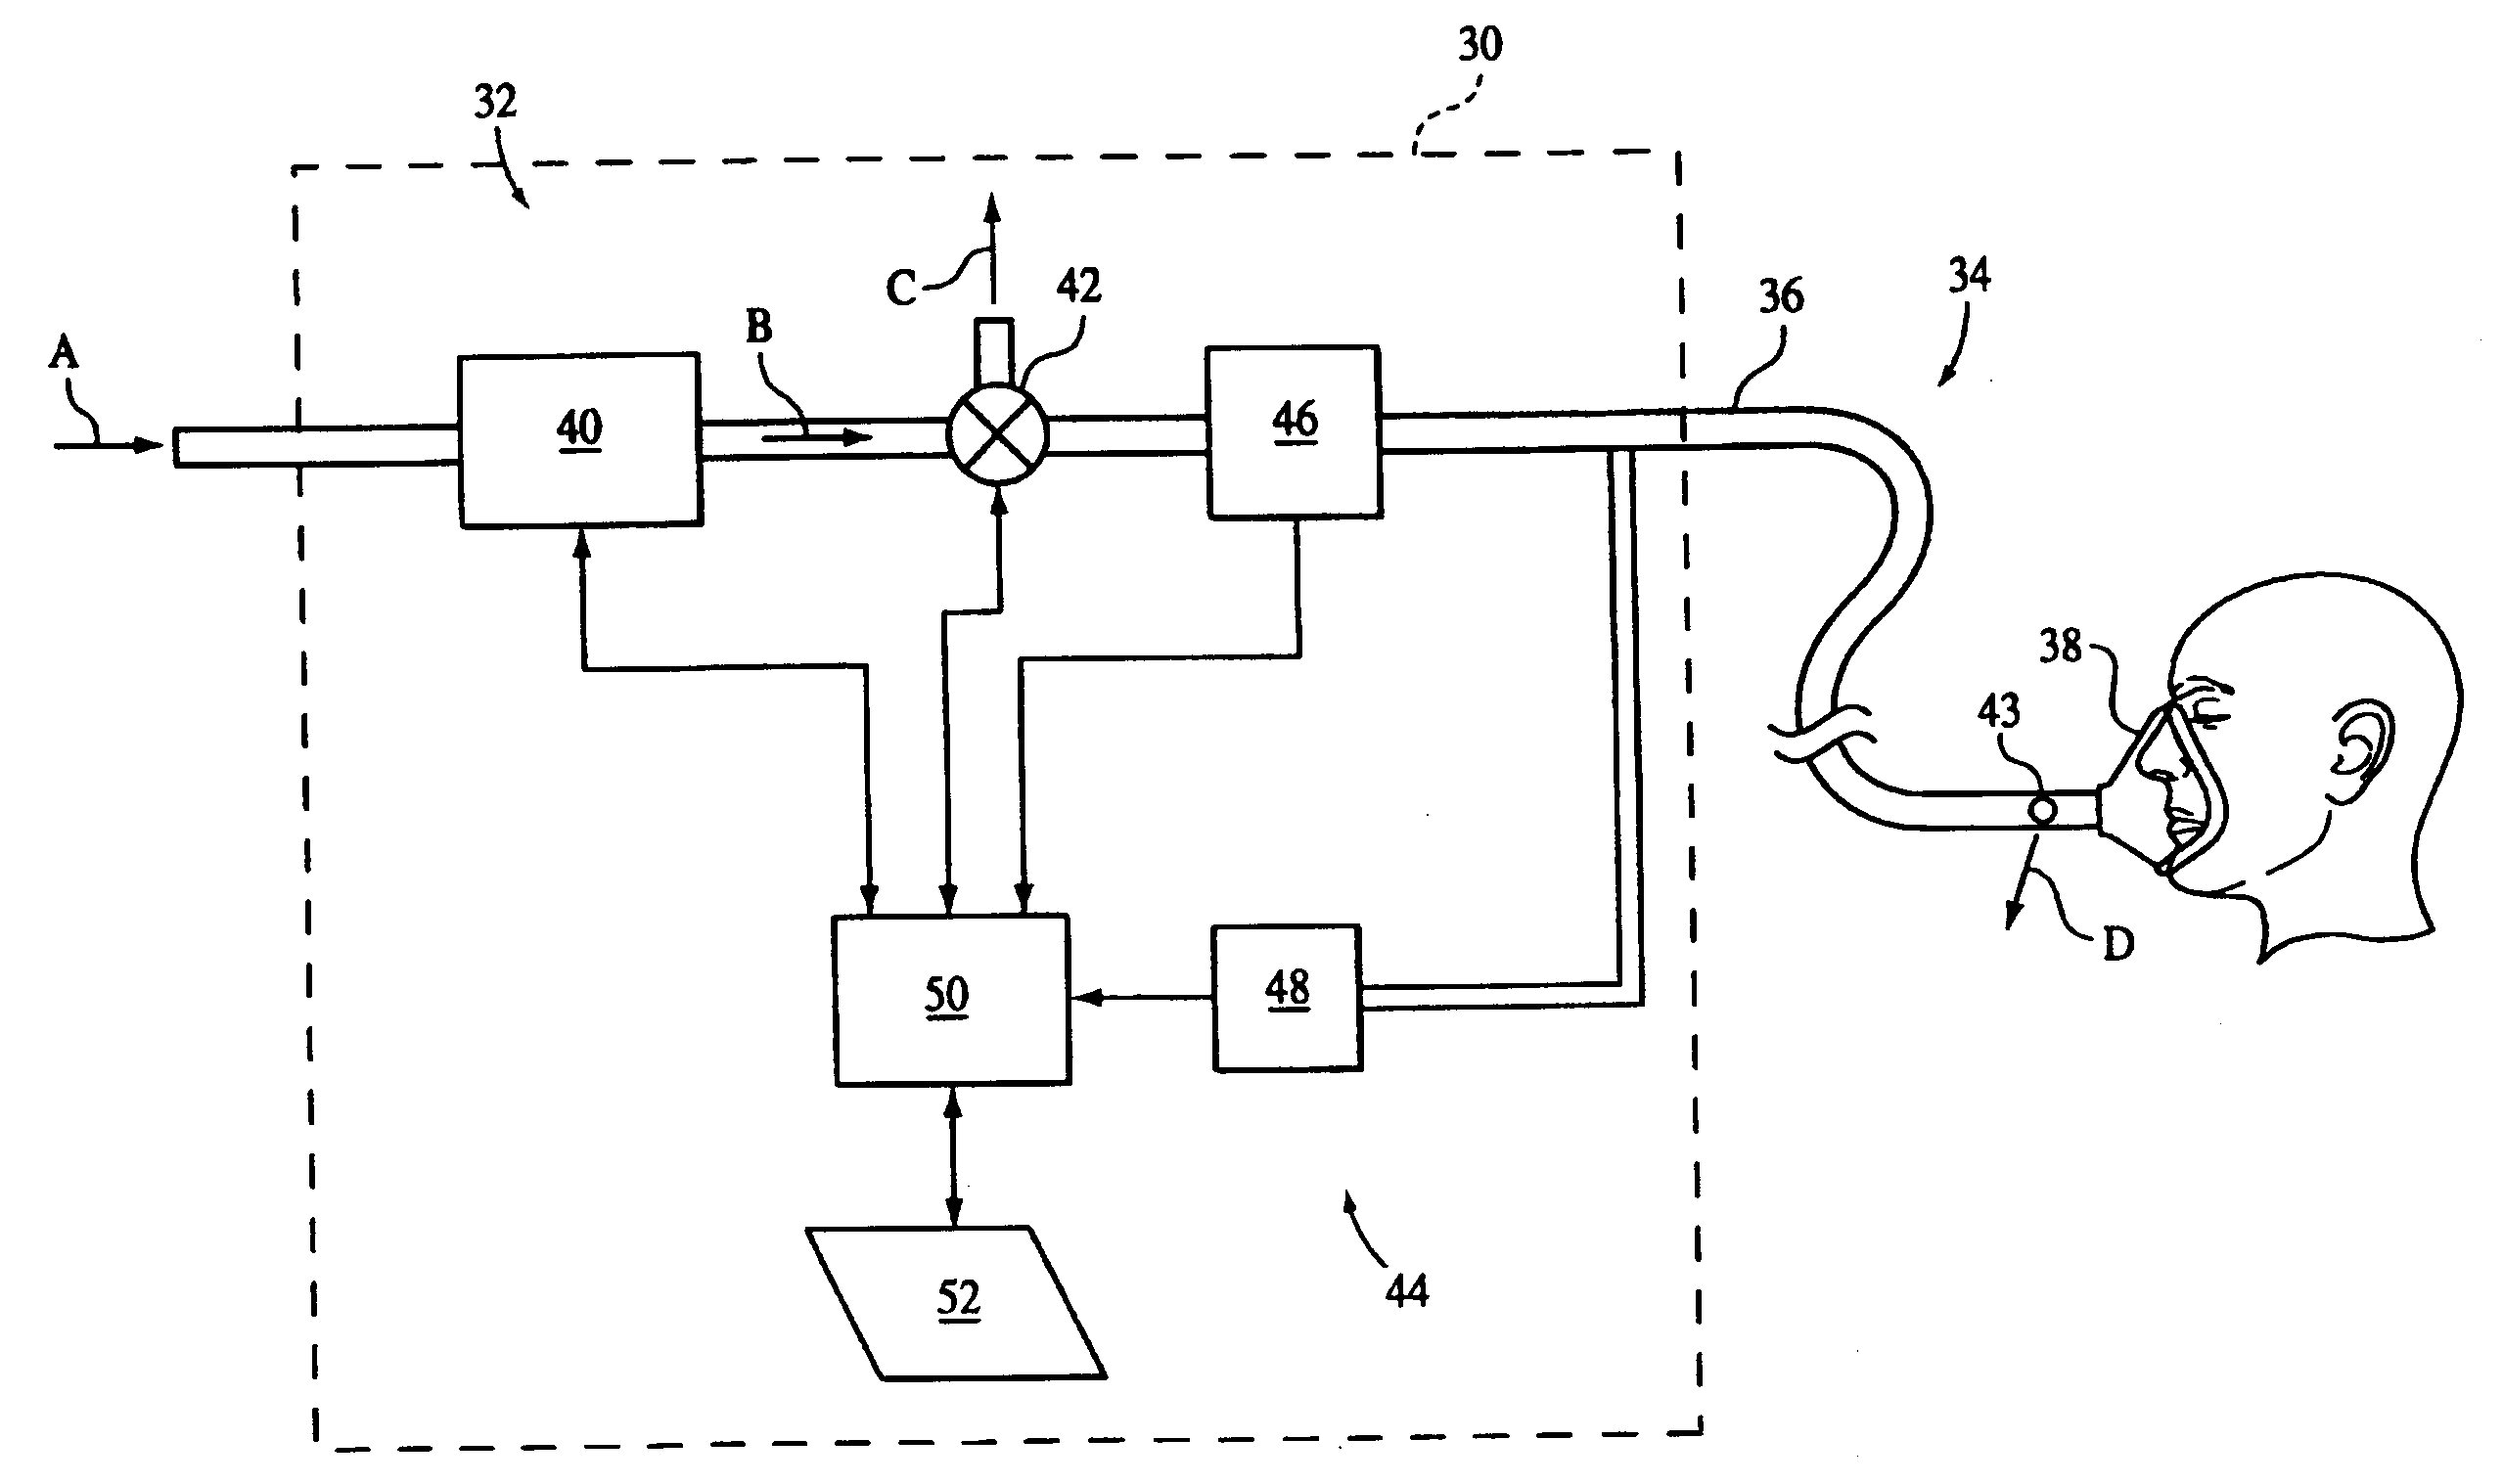 Auto-Titration Bi-Level Pressure Support System and Method of Using Same